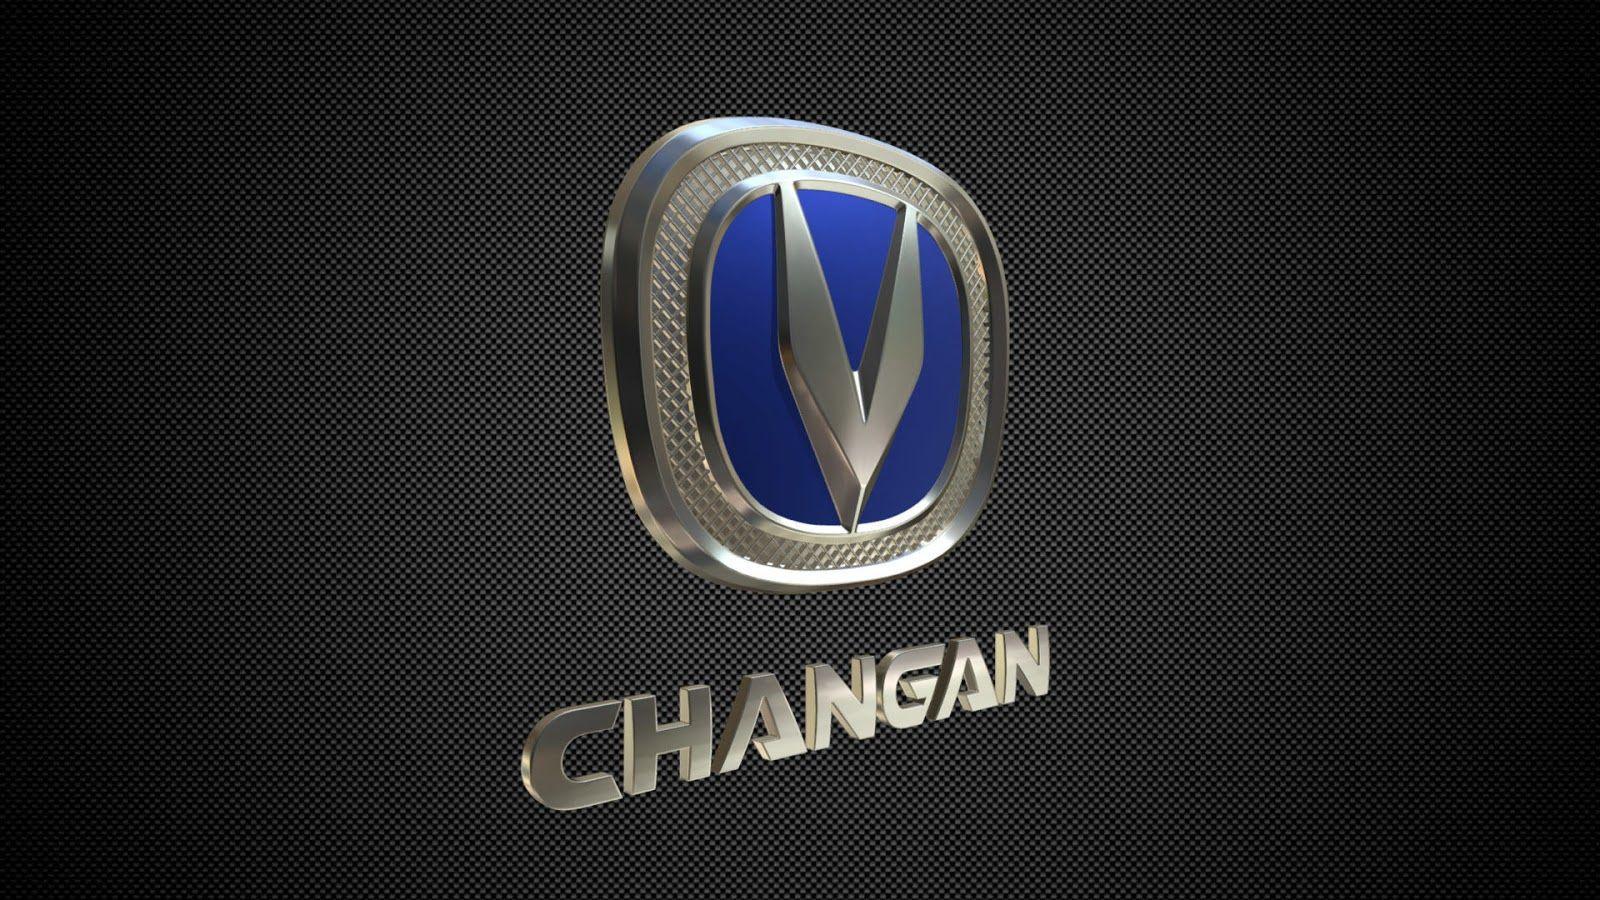 Changan Logo Information, HD, Png and Vector Download ☒ Updated